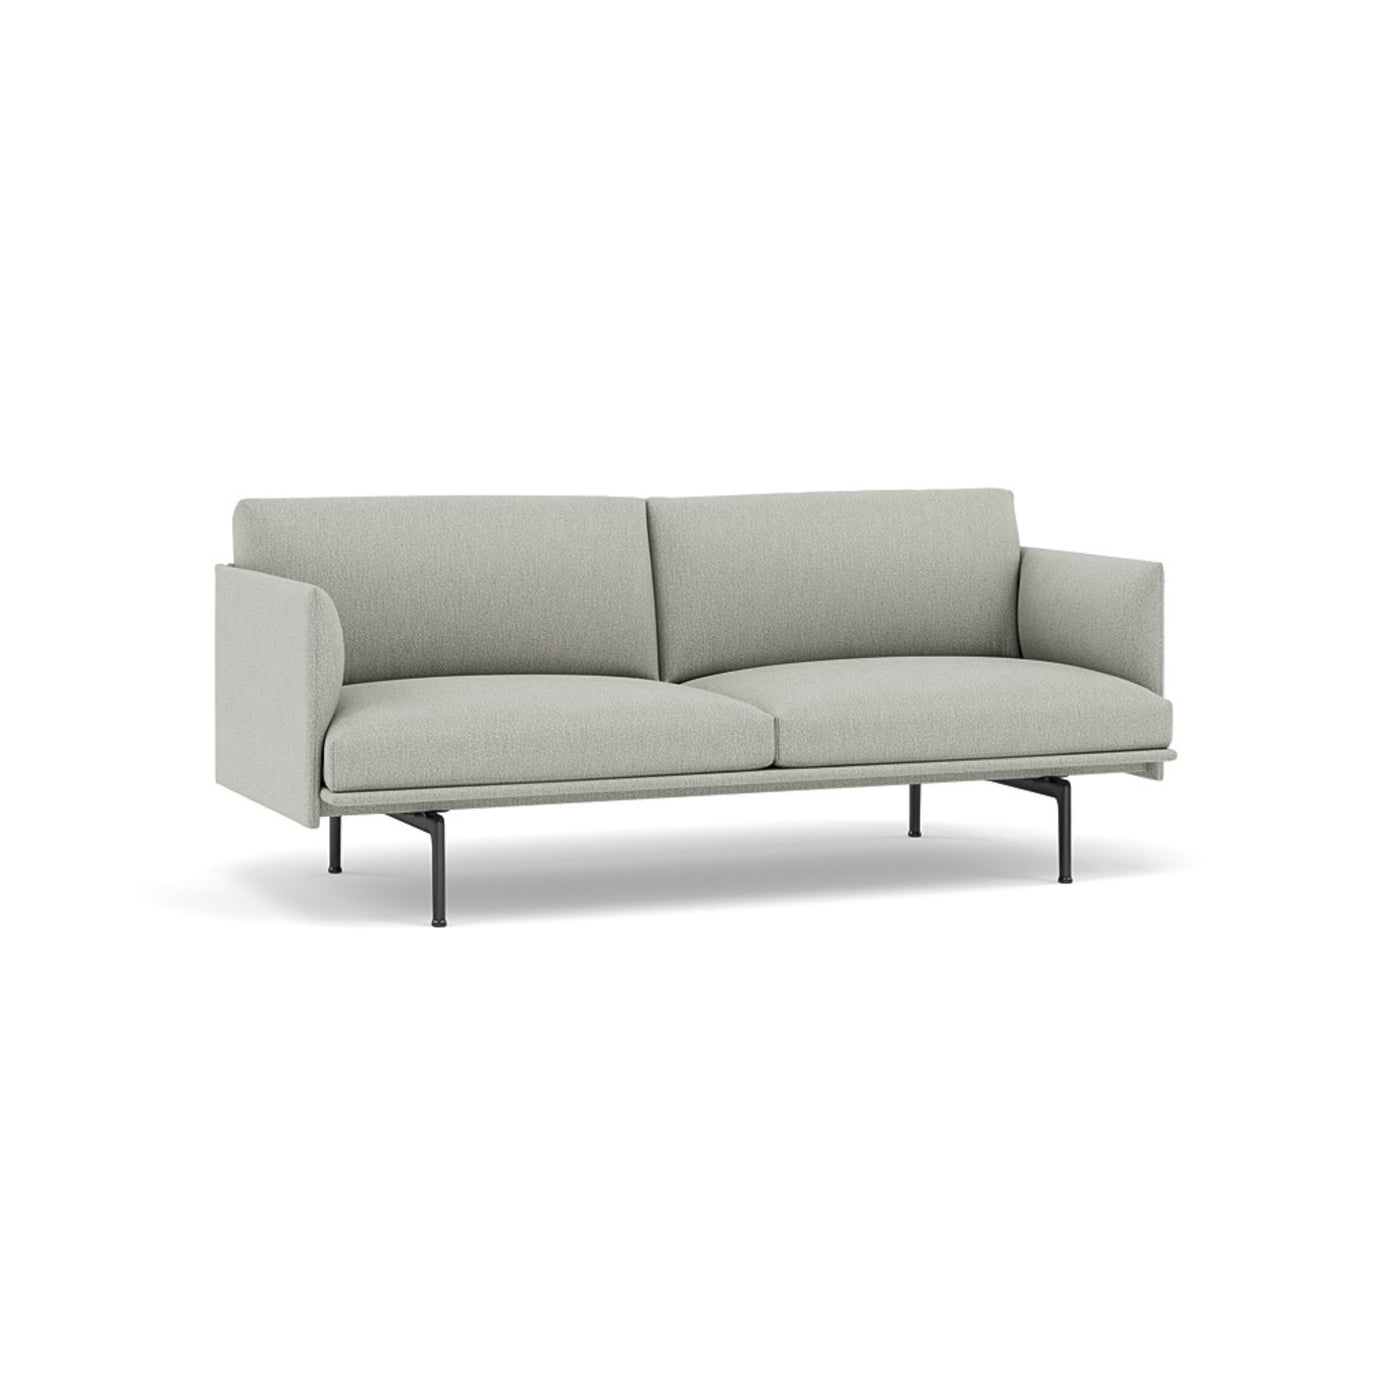 Muuto Outline Studio Sofa. Made to order from someday designs. #colour_clay-12